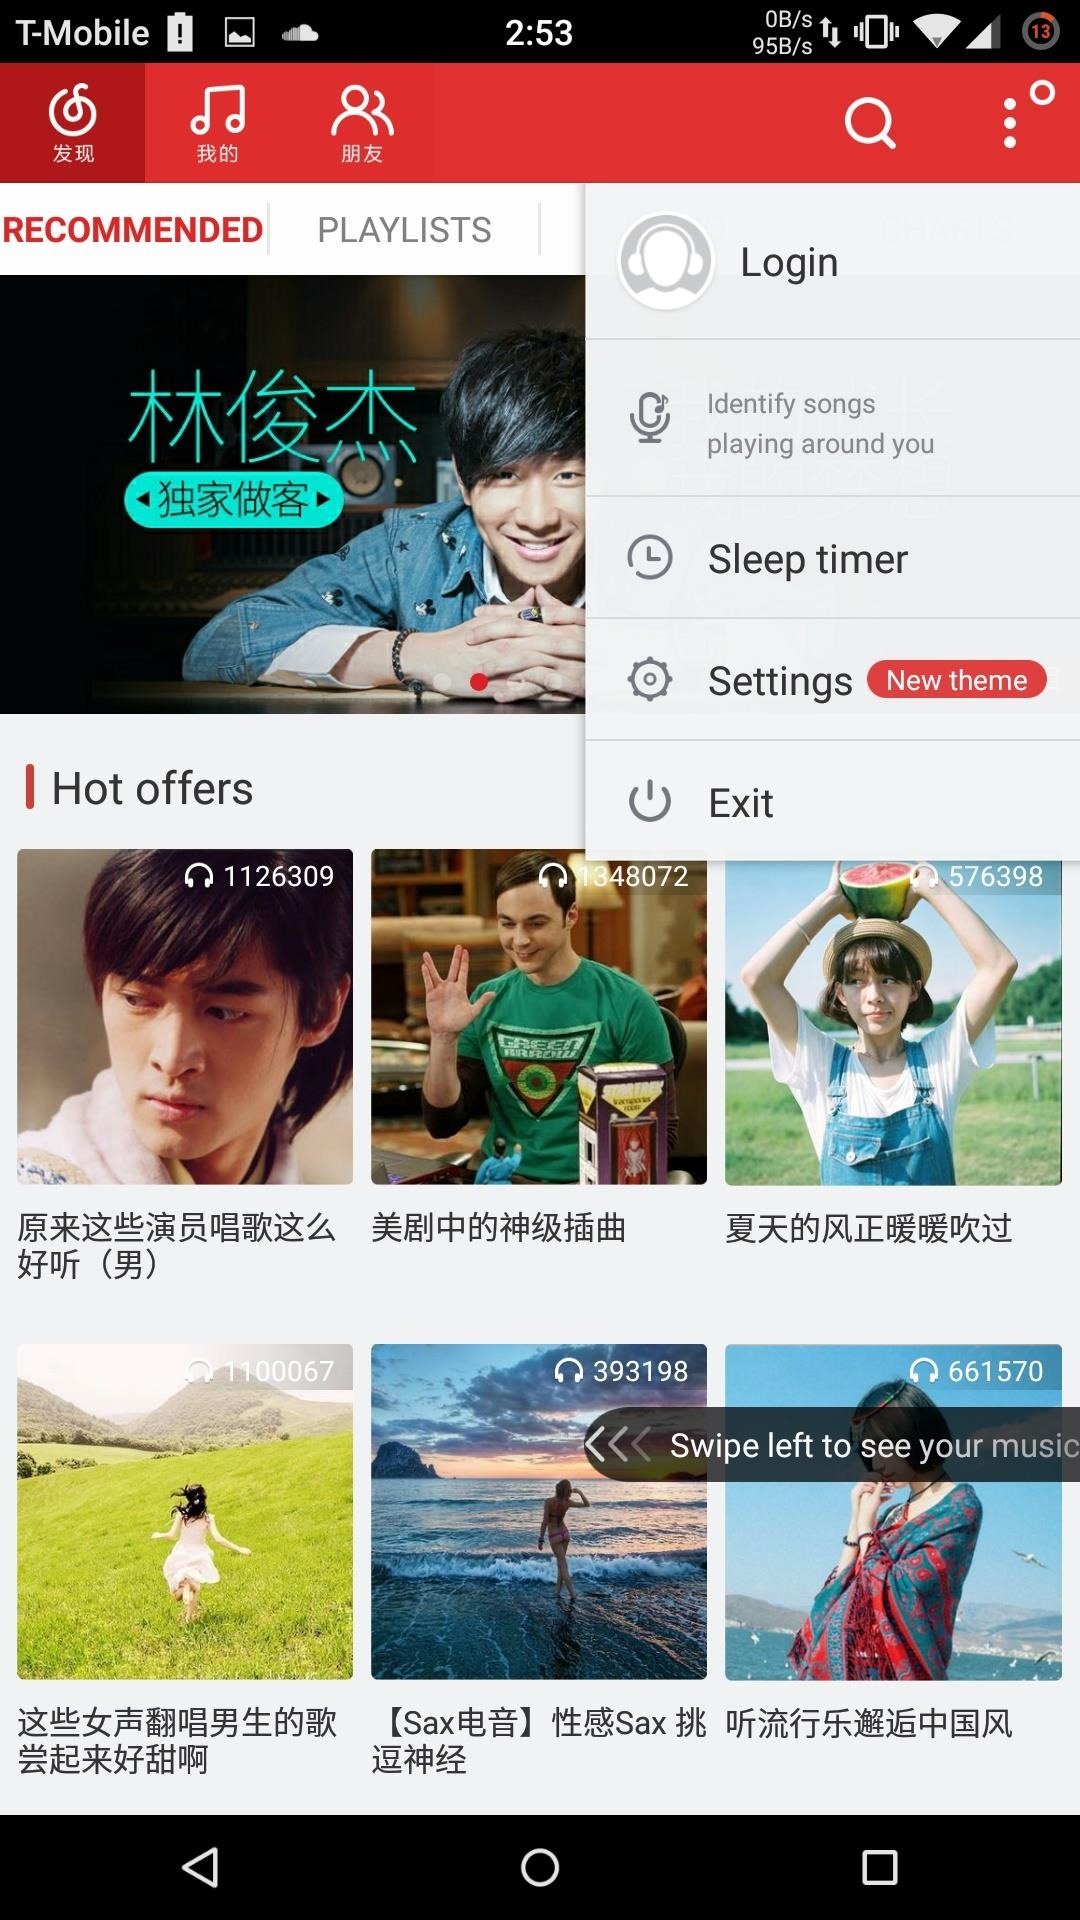 NetEase Music: The Free Service That Will Get You to Leave Spotify